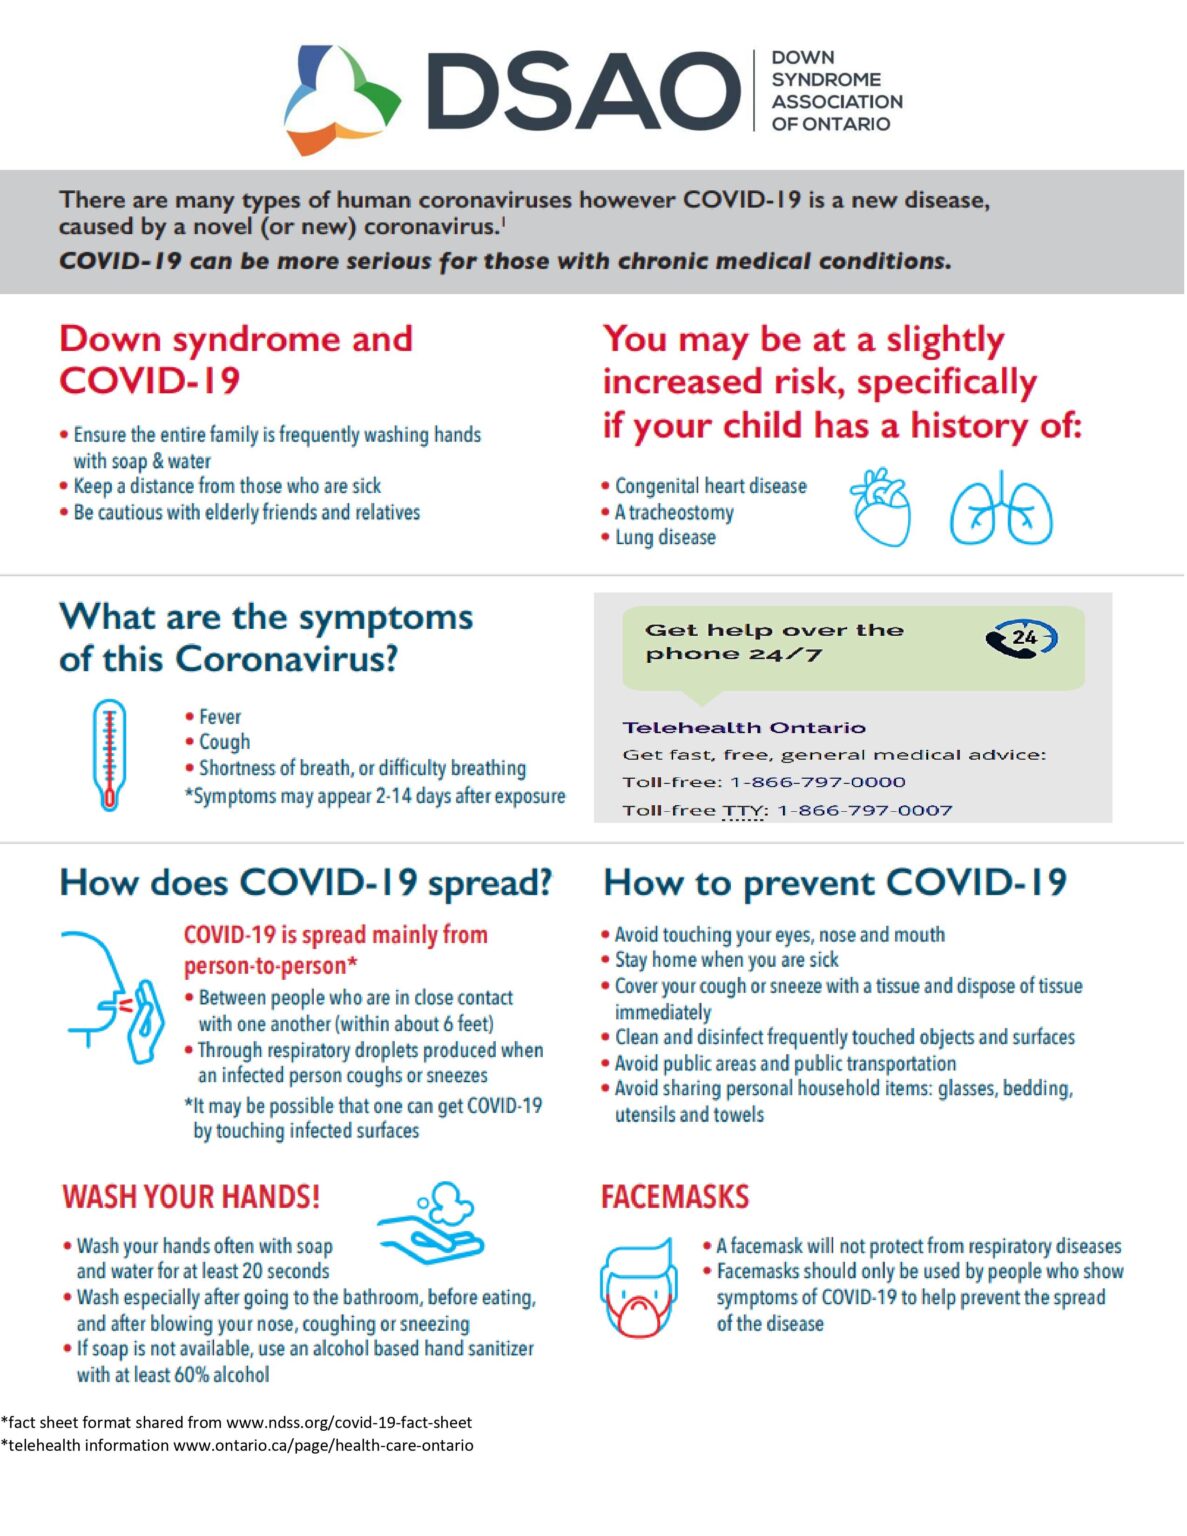 Covid information sheet provided by Down Syndrome Association of Ontario, DSAO